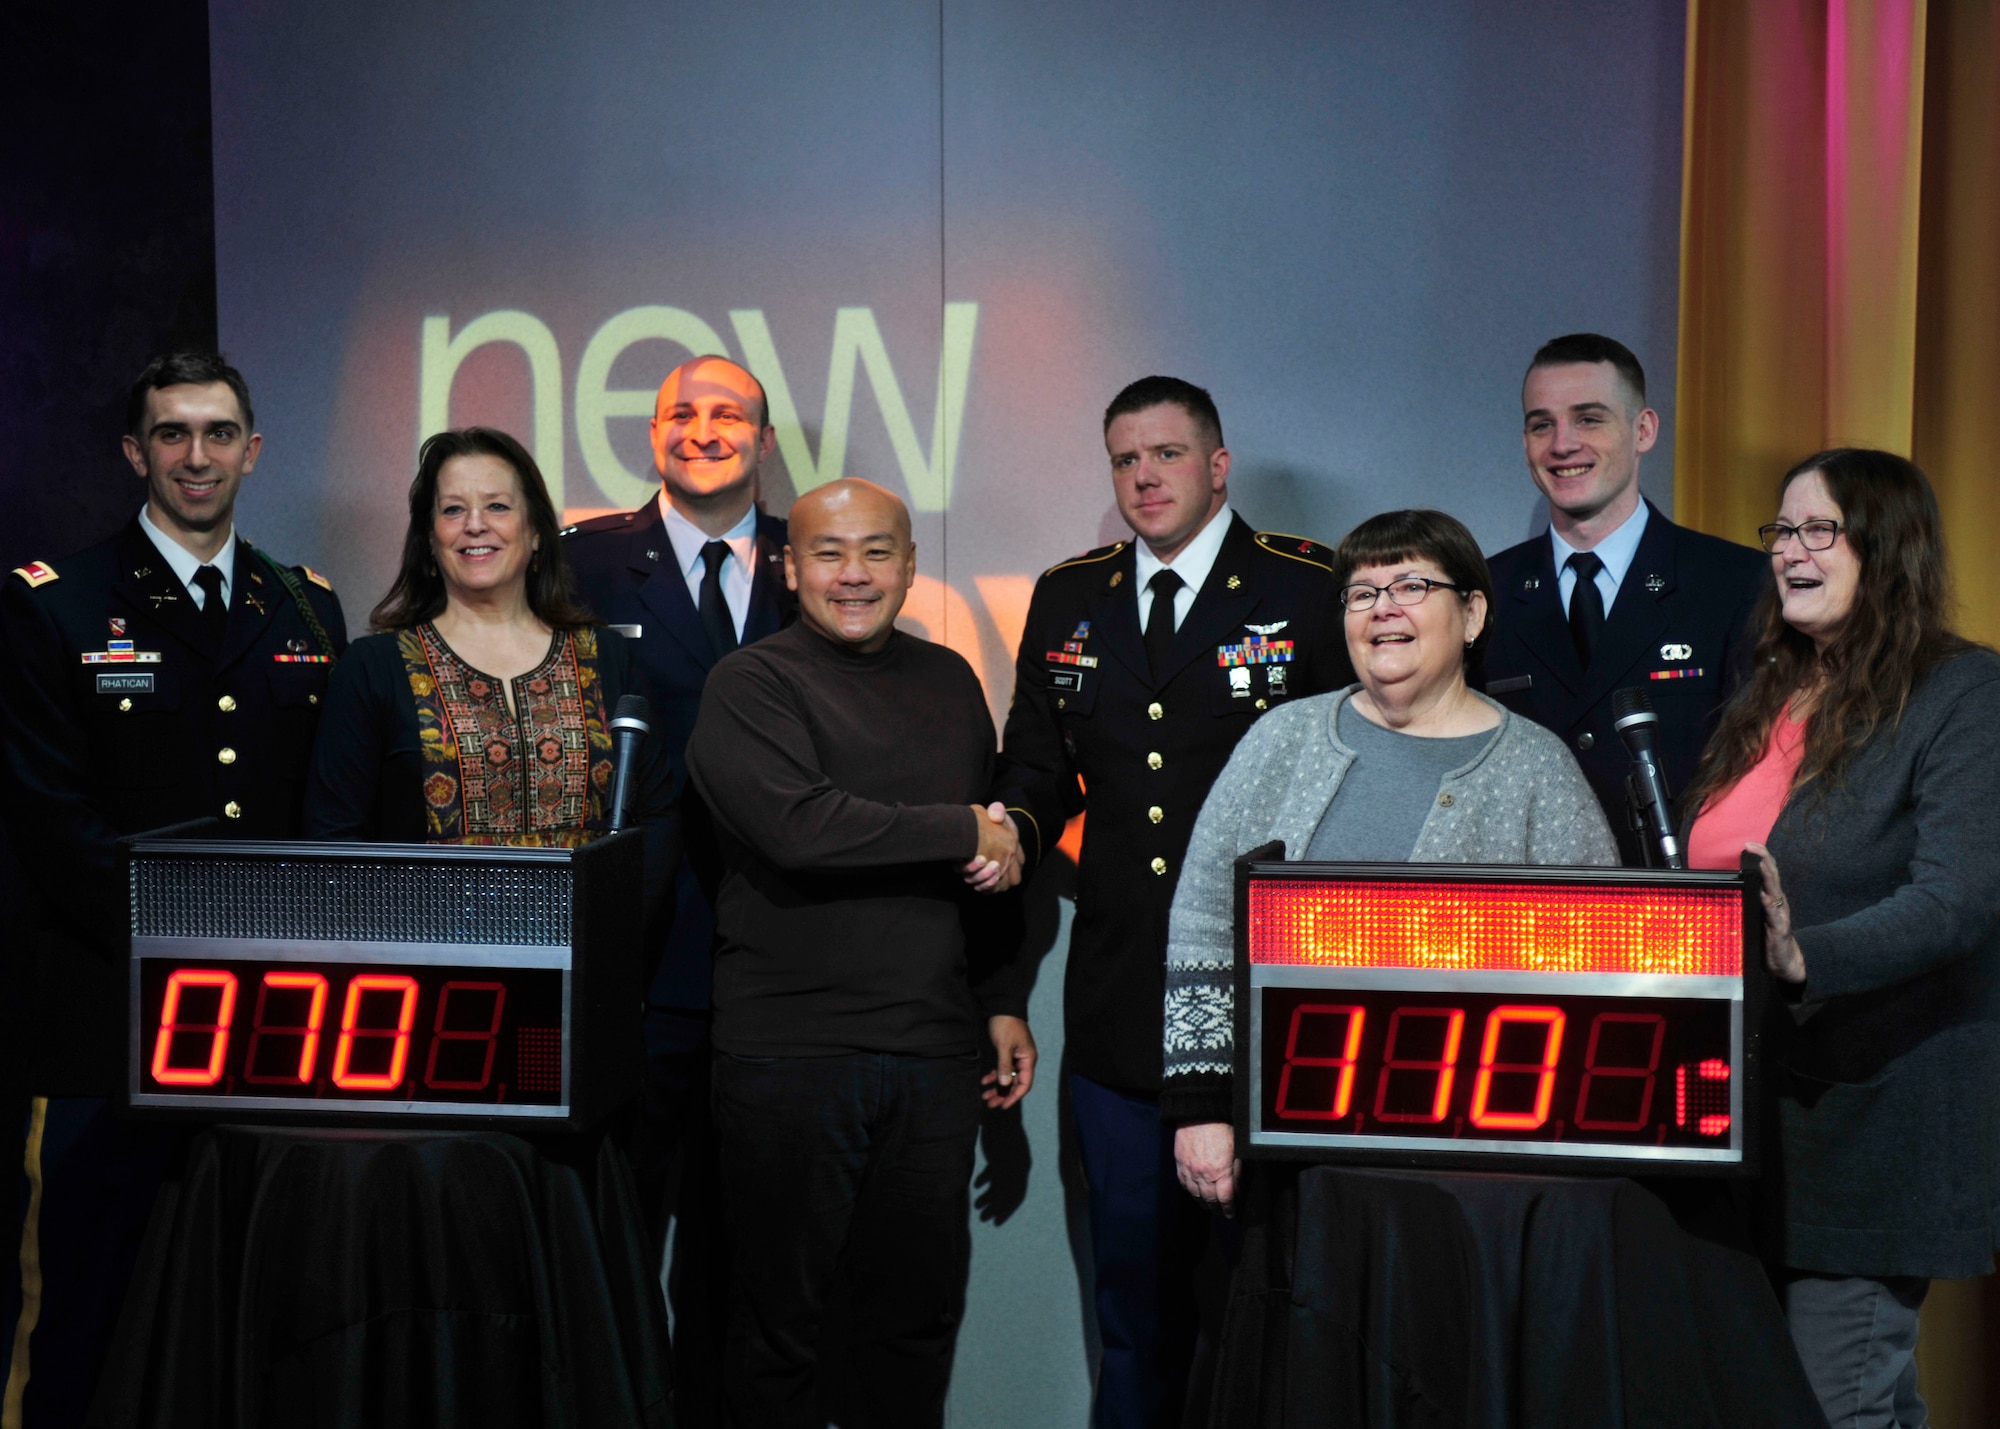 U.S. Soldiers and U.S. Airmen from Joint Base Lewis-McChord, Wash., pose for a photo with a group of civilians from the King 5 “New Day” show studio audience following a game of head-to-head trivia, Feb. 28, 2017 in Seattle, Wash. Though the competition was close, the team representing JBLM, which featured two Soldiers and two Airmen, emerged victorious. (U.S. Air Force photo/Staff Sgt. Whitney Amstutz)